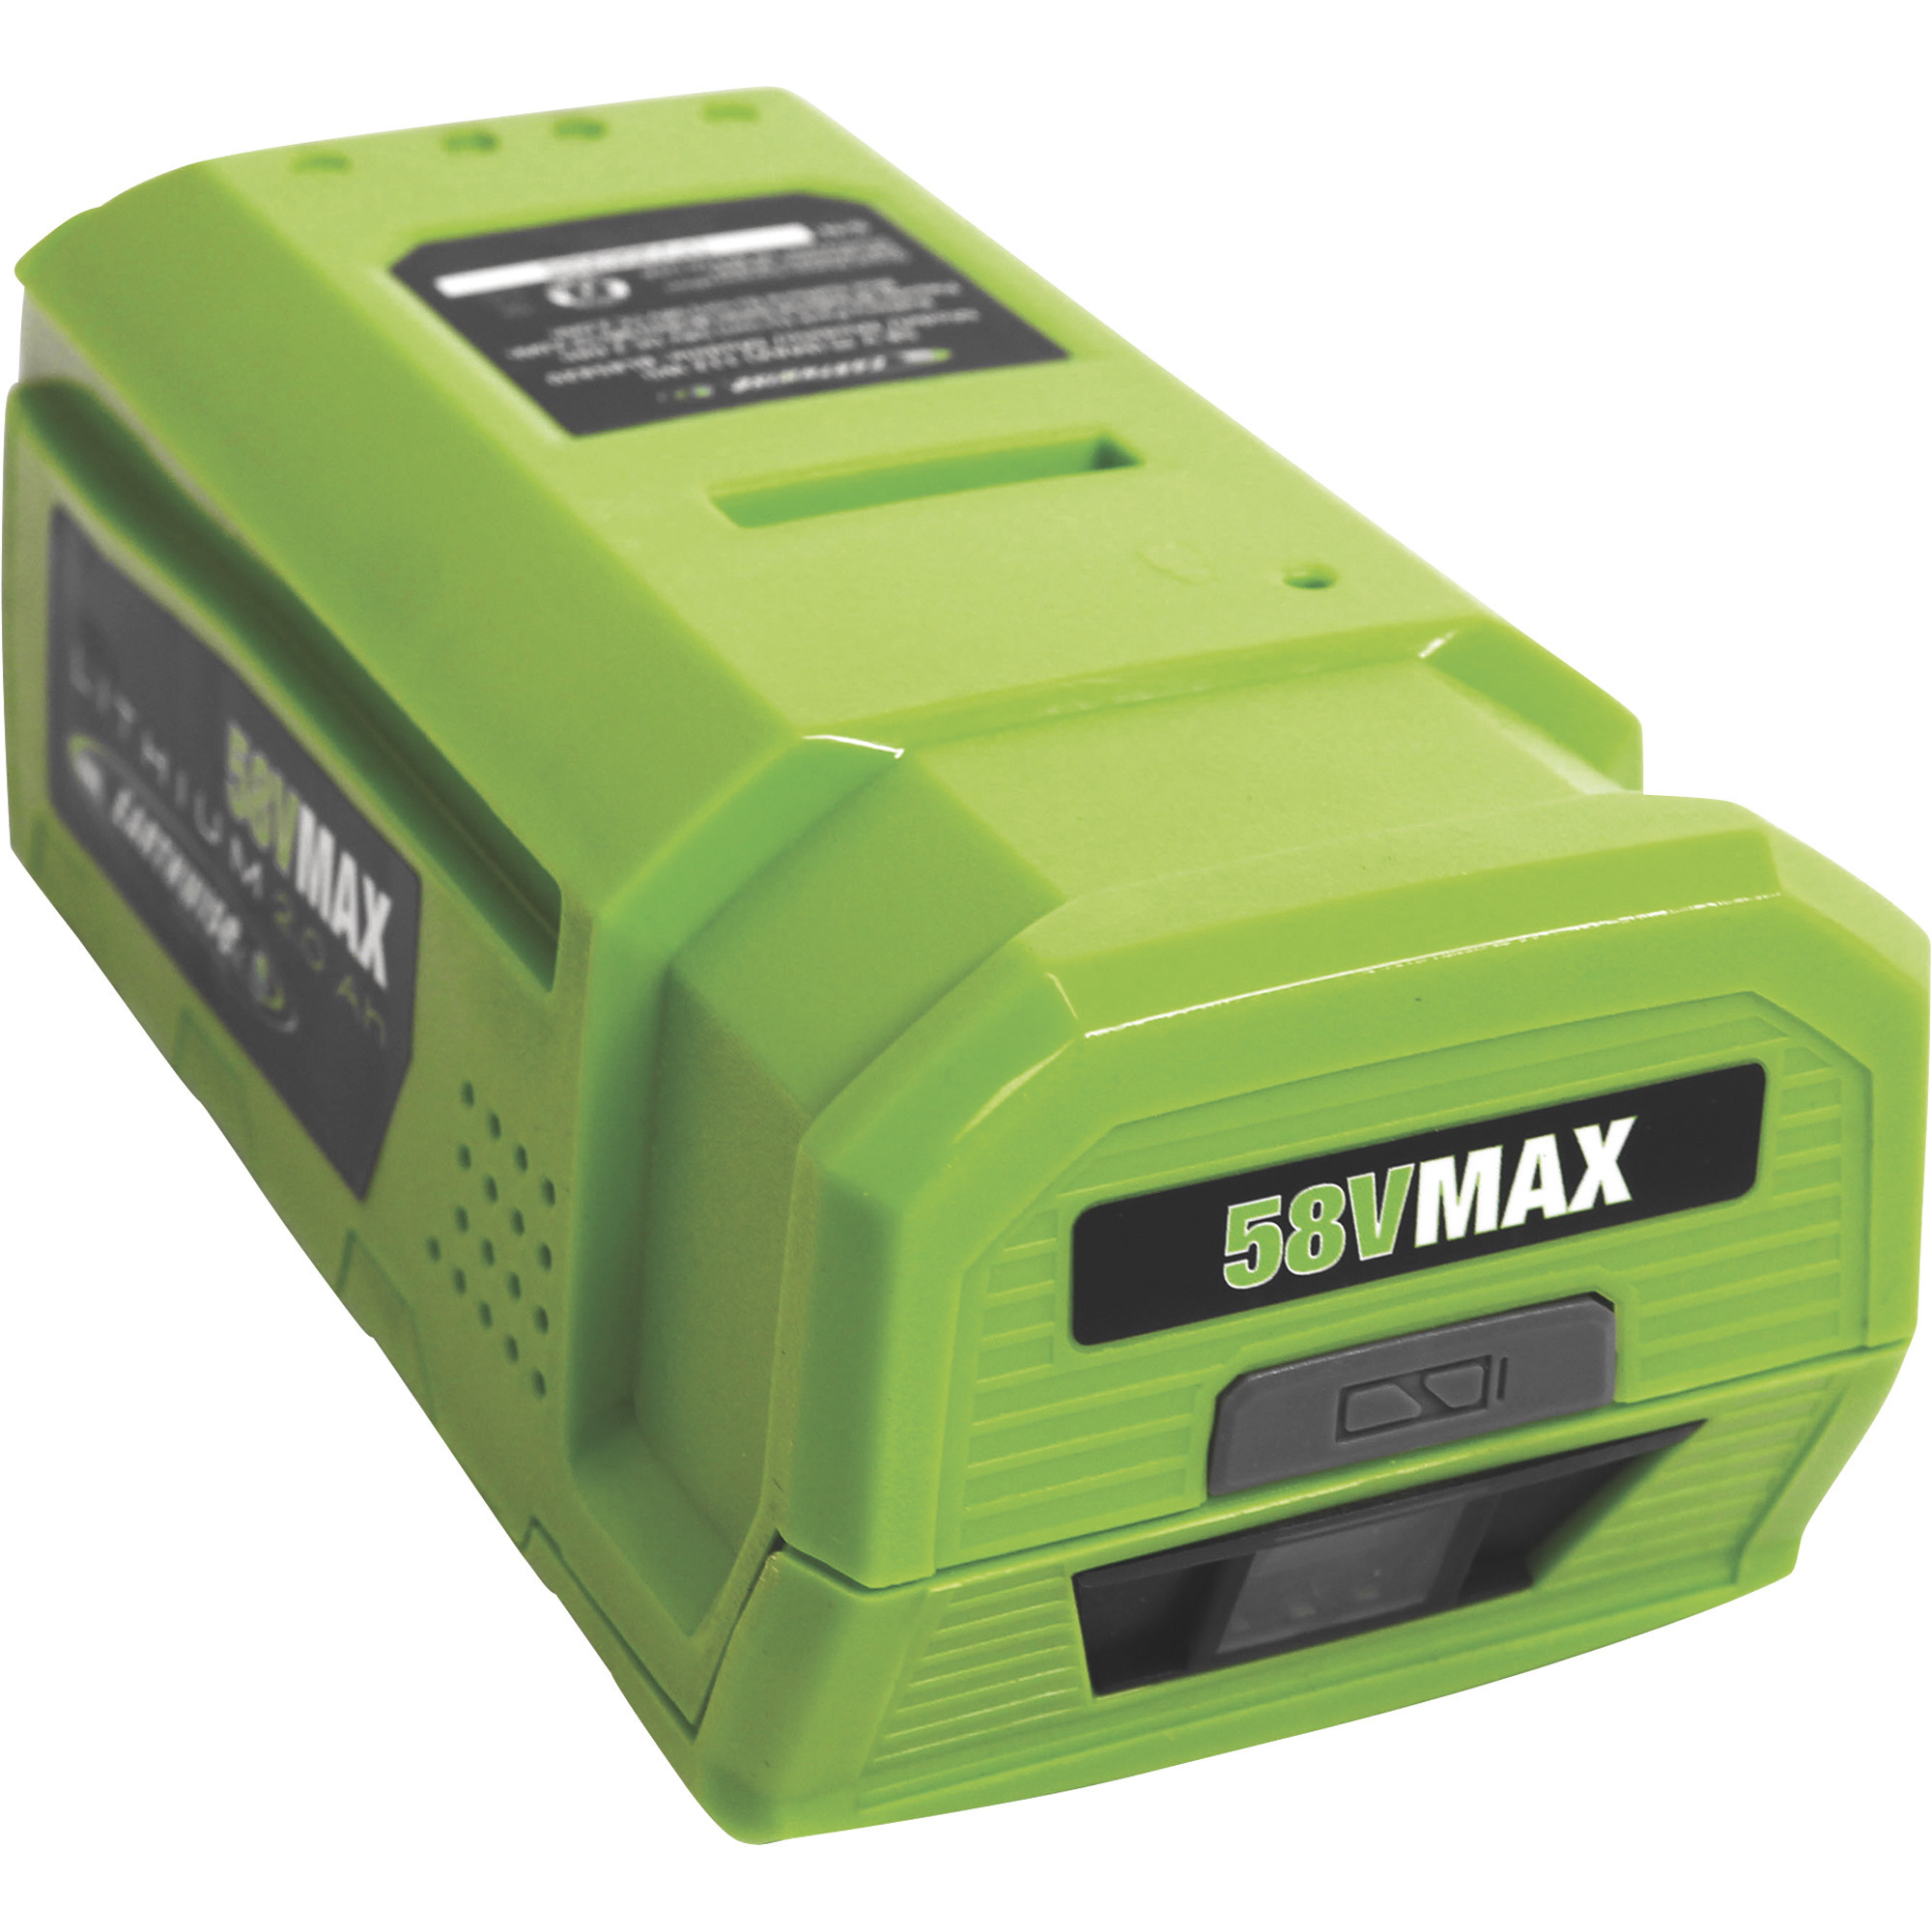 Earthwise 58 Volt Lithium-Ion Battery, 2.0 Ah, Model BL85820